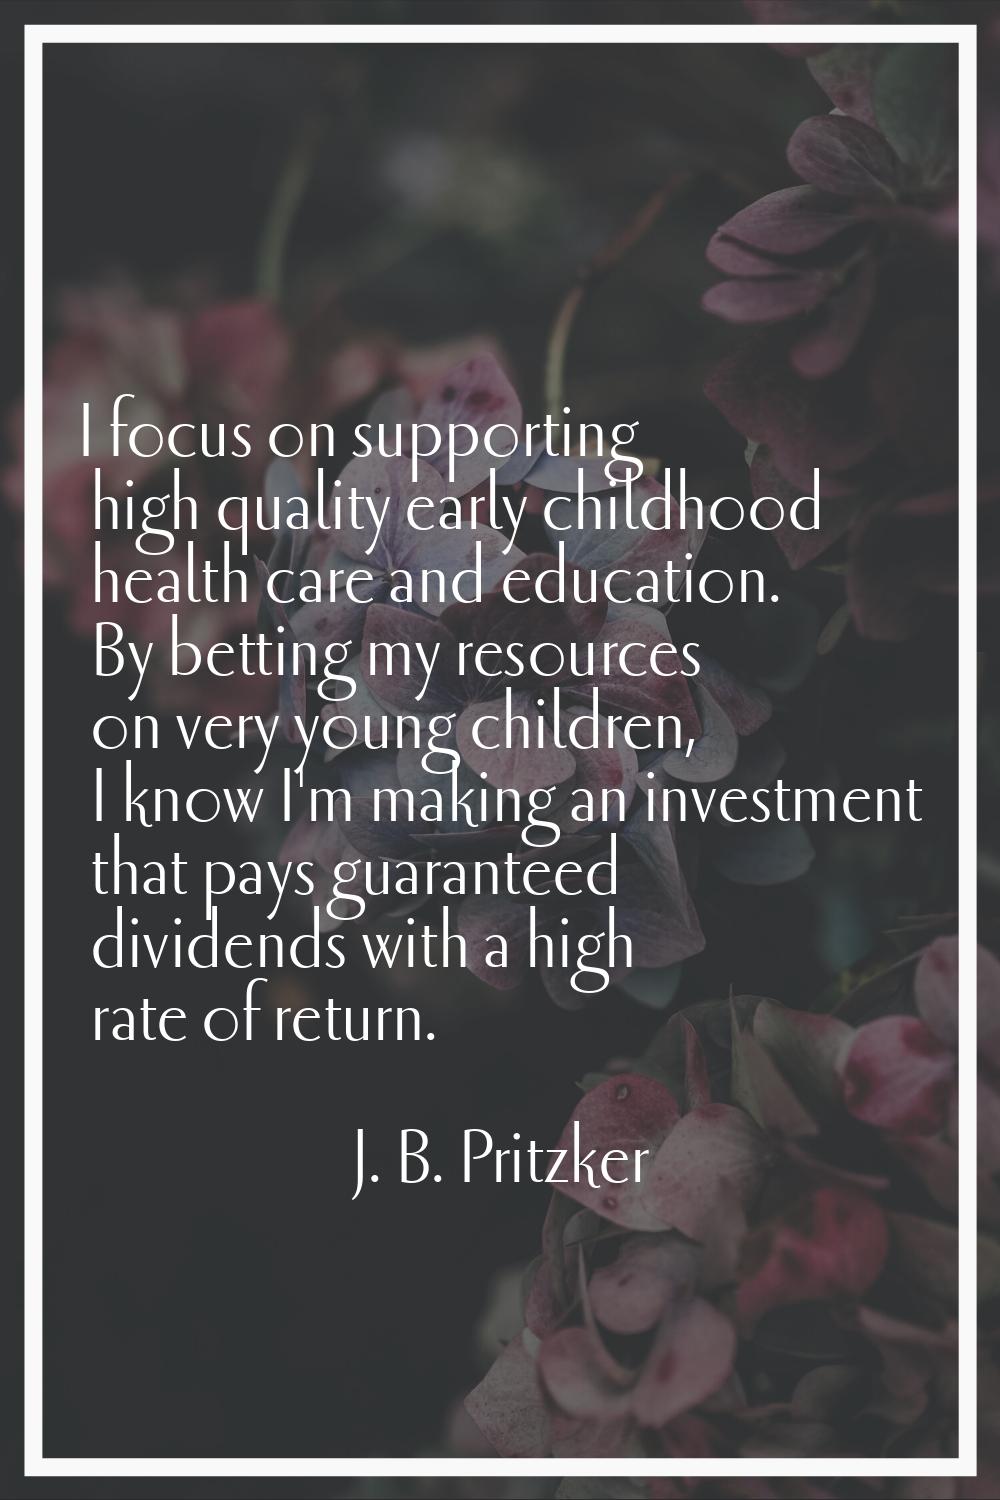 I focus on supporting high quality early childhood health care and education. By betting my resourc